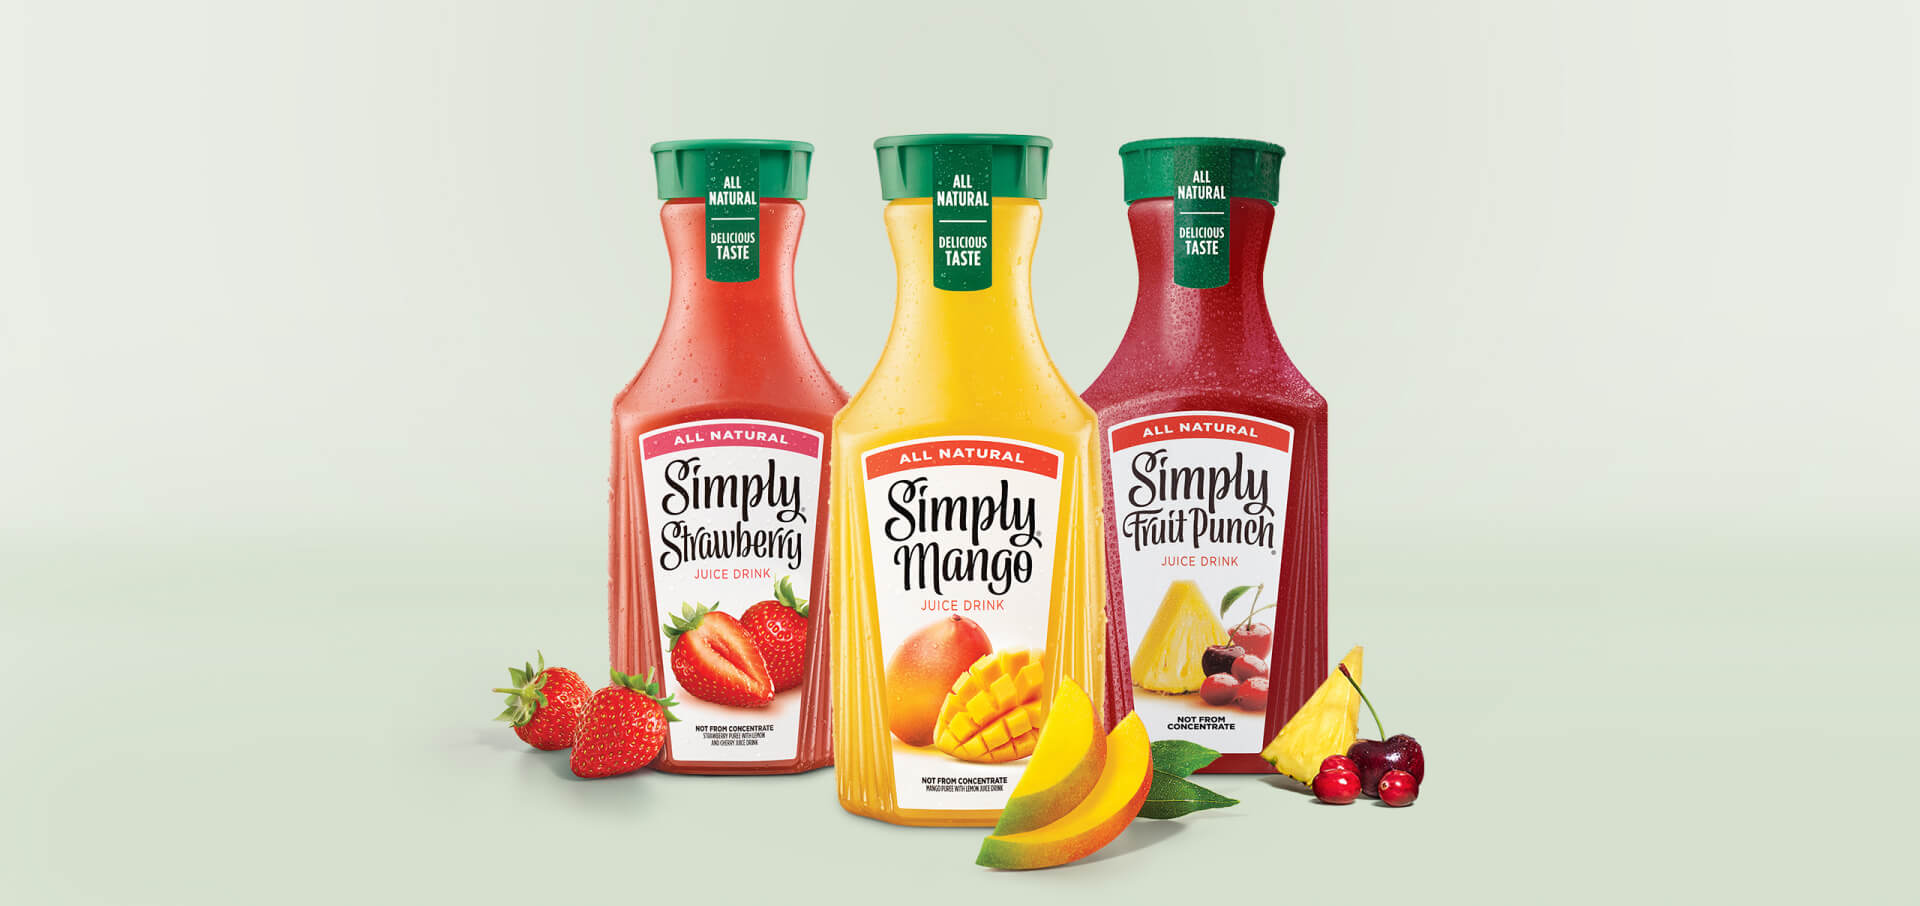 3 flavors of Simply juice